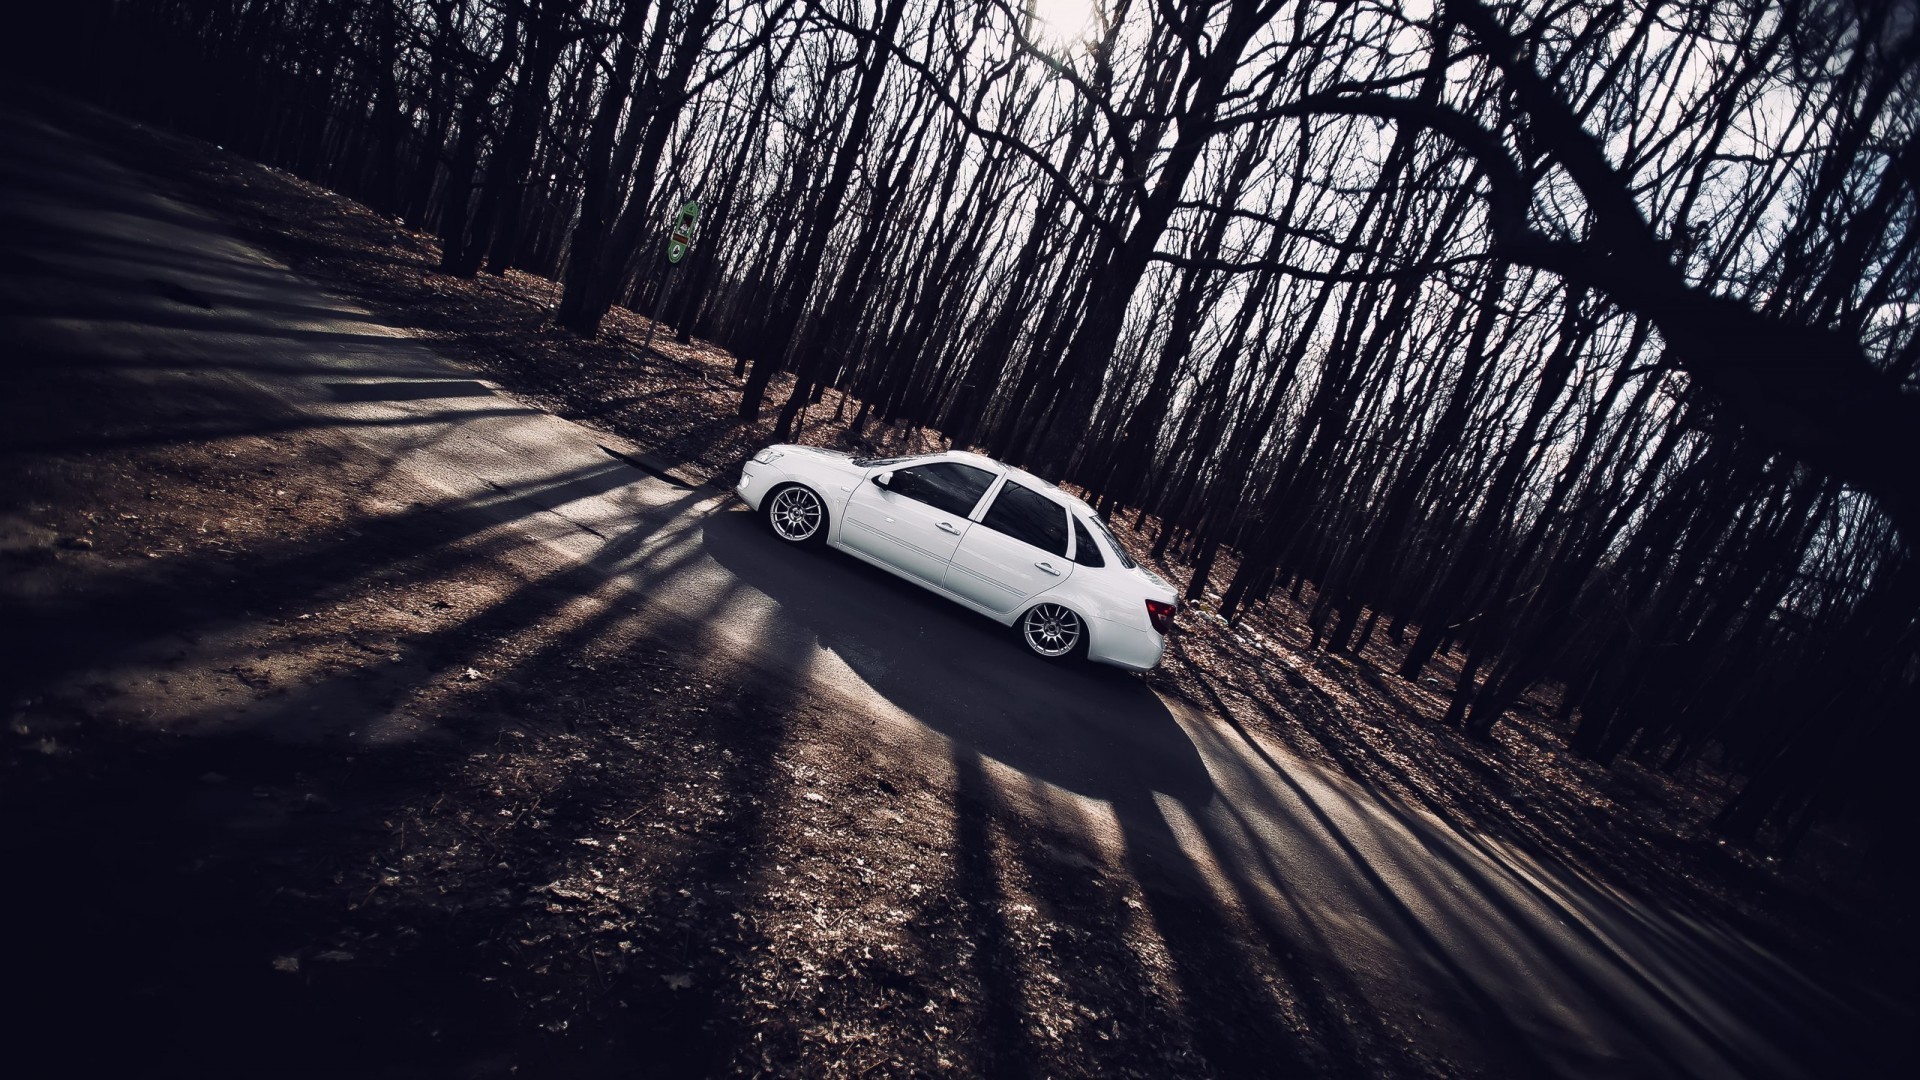 General 1920x1080 car vehicle white cars trees outdoors